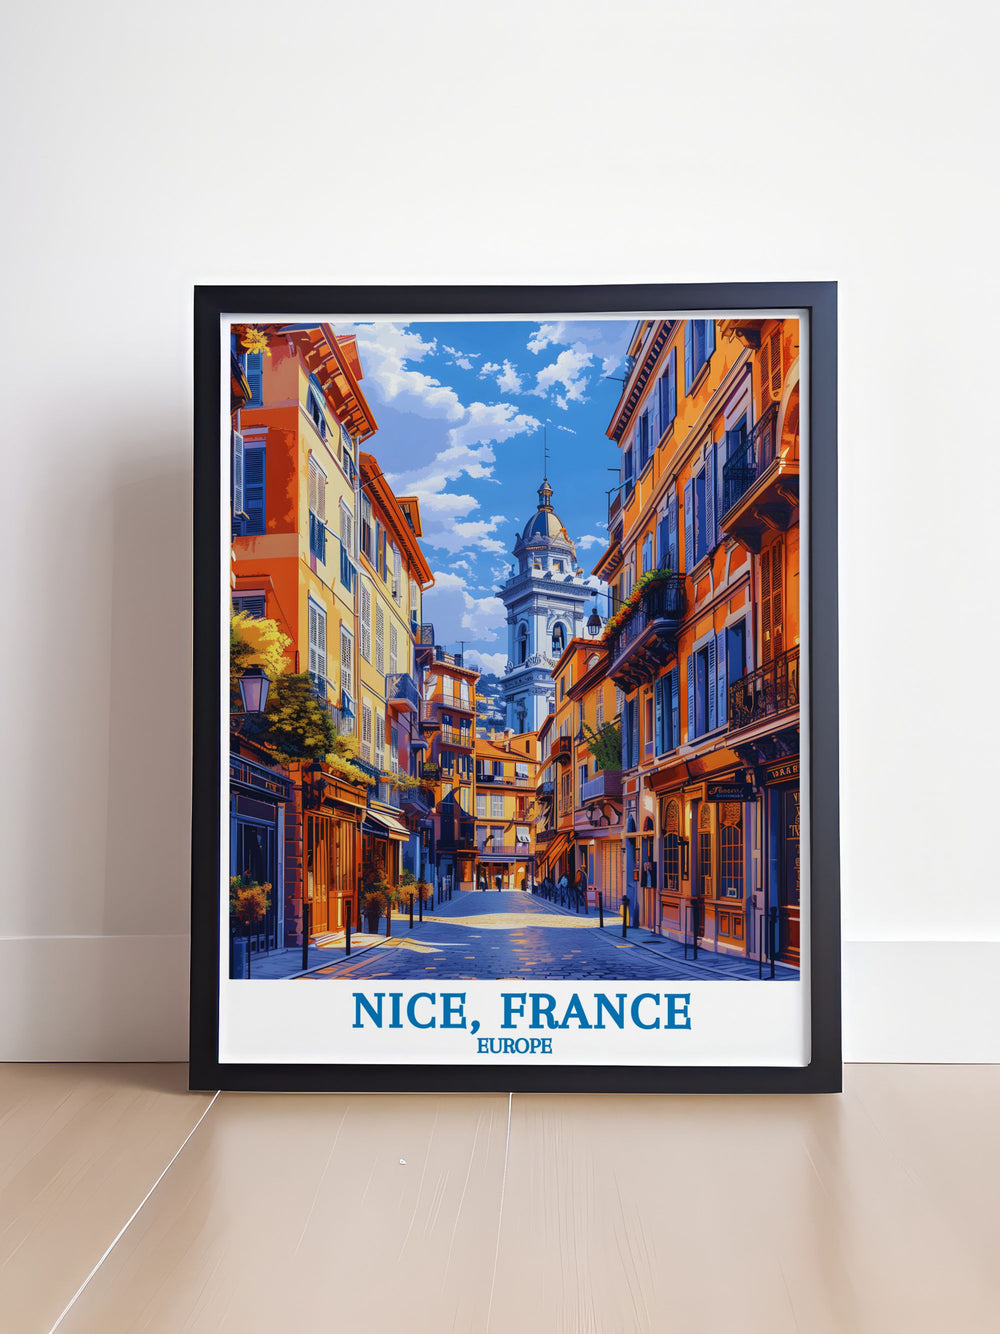 Featuring the historic Vieux Nice in France, this travel poster brings to life the charming architecture, colorful streets, and lively marketplaces, making it a perfect addition to any collection of French art.